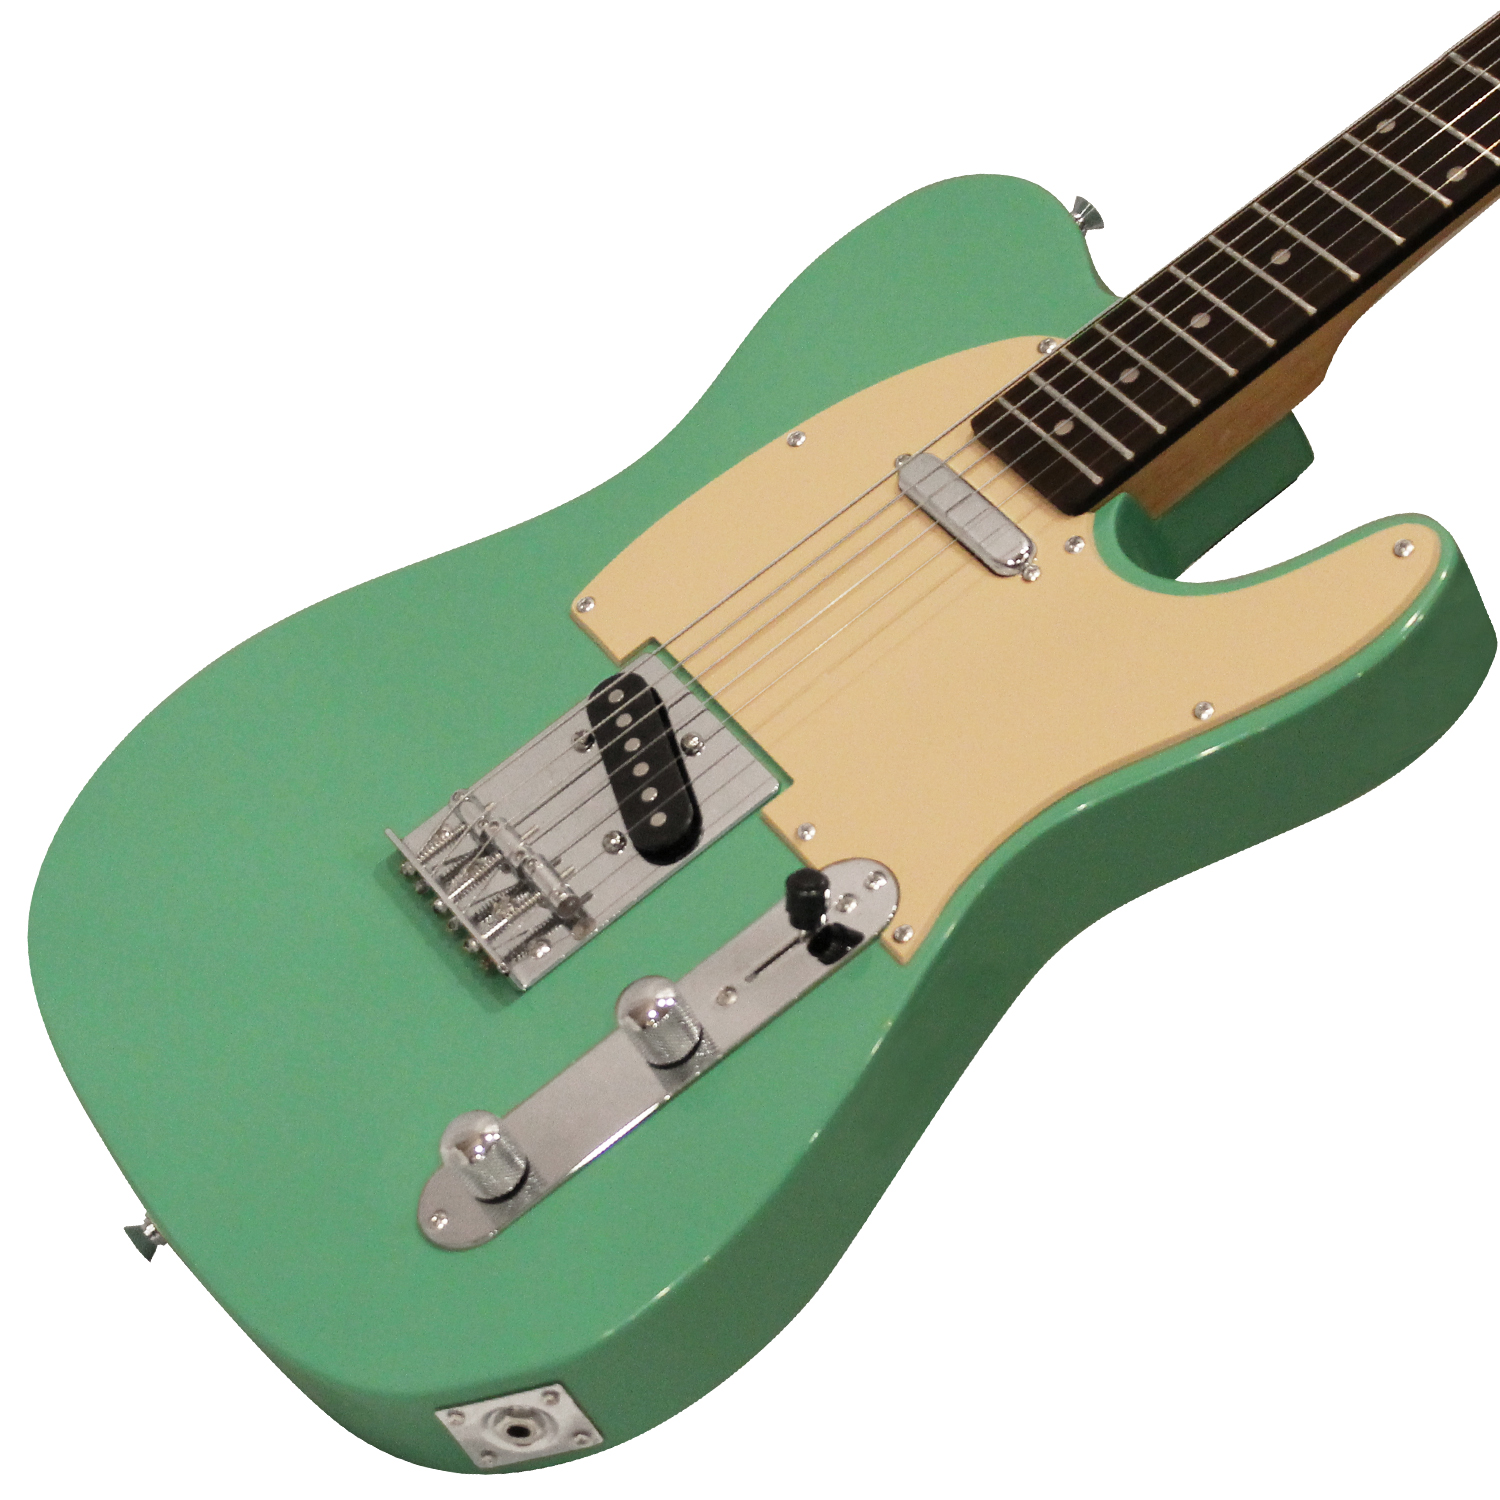 Sawtooth Surf Green ET Series Electric Guitar with Aged White Pickguard  Includes: Gig Bag, Amp, Picks, Tuner, Strap, Stand, Cable, and Guitar  Instructional